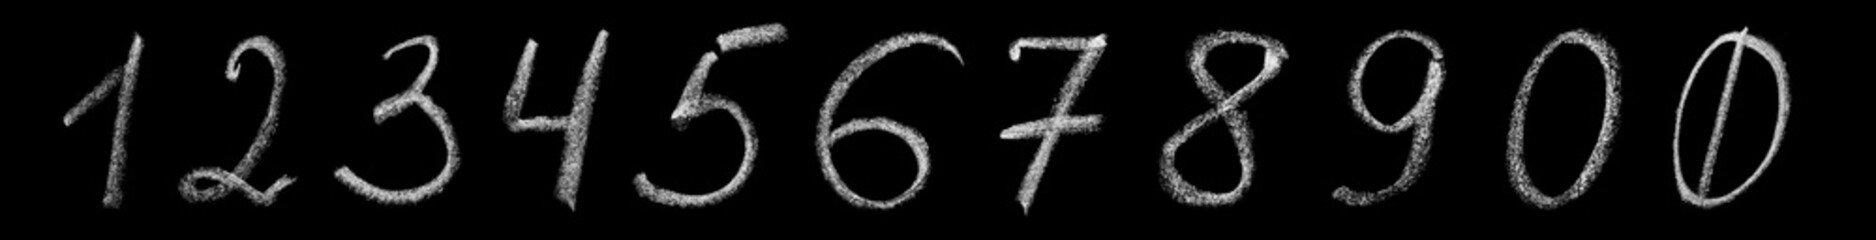 Hand drawn numbers 0, 1, 2, 3, 4, 5, 6, 7, 8, 9 in chalk on a blackboard isolated on black background. Design elements, chalk font